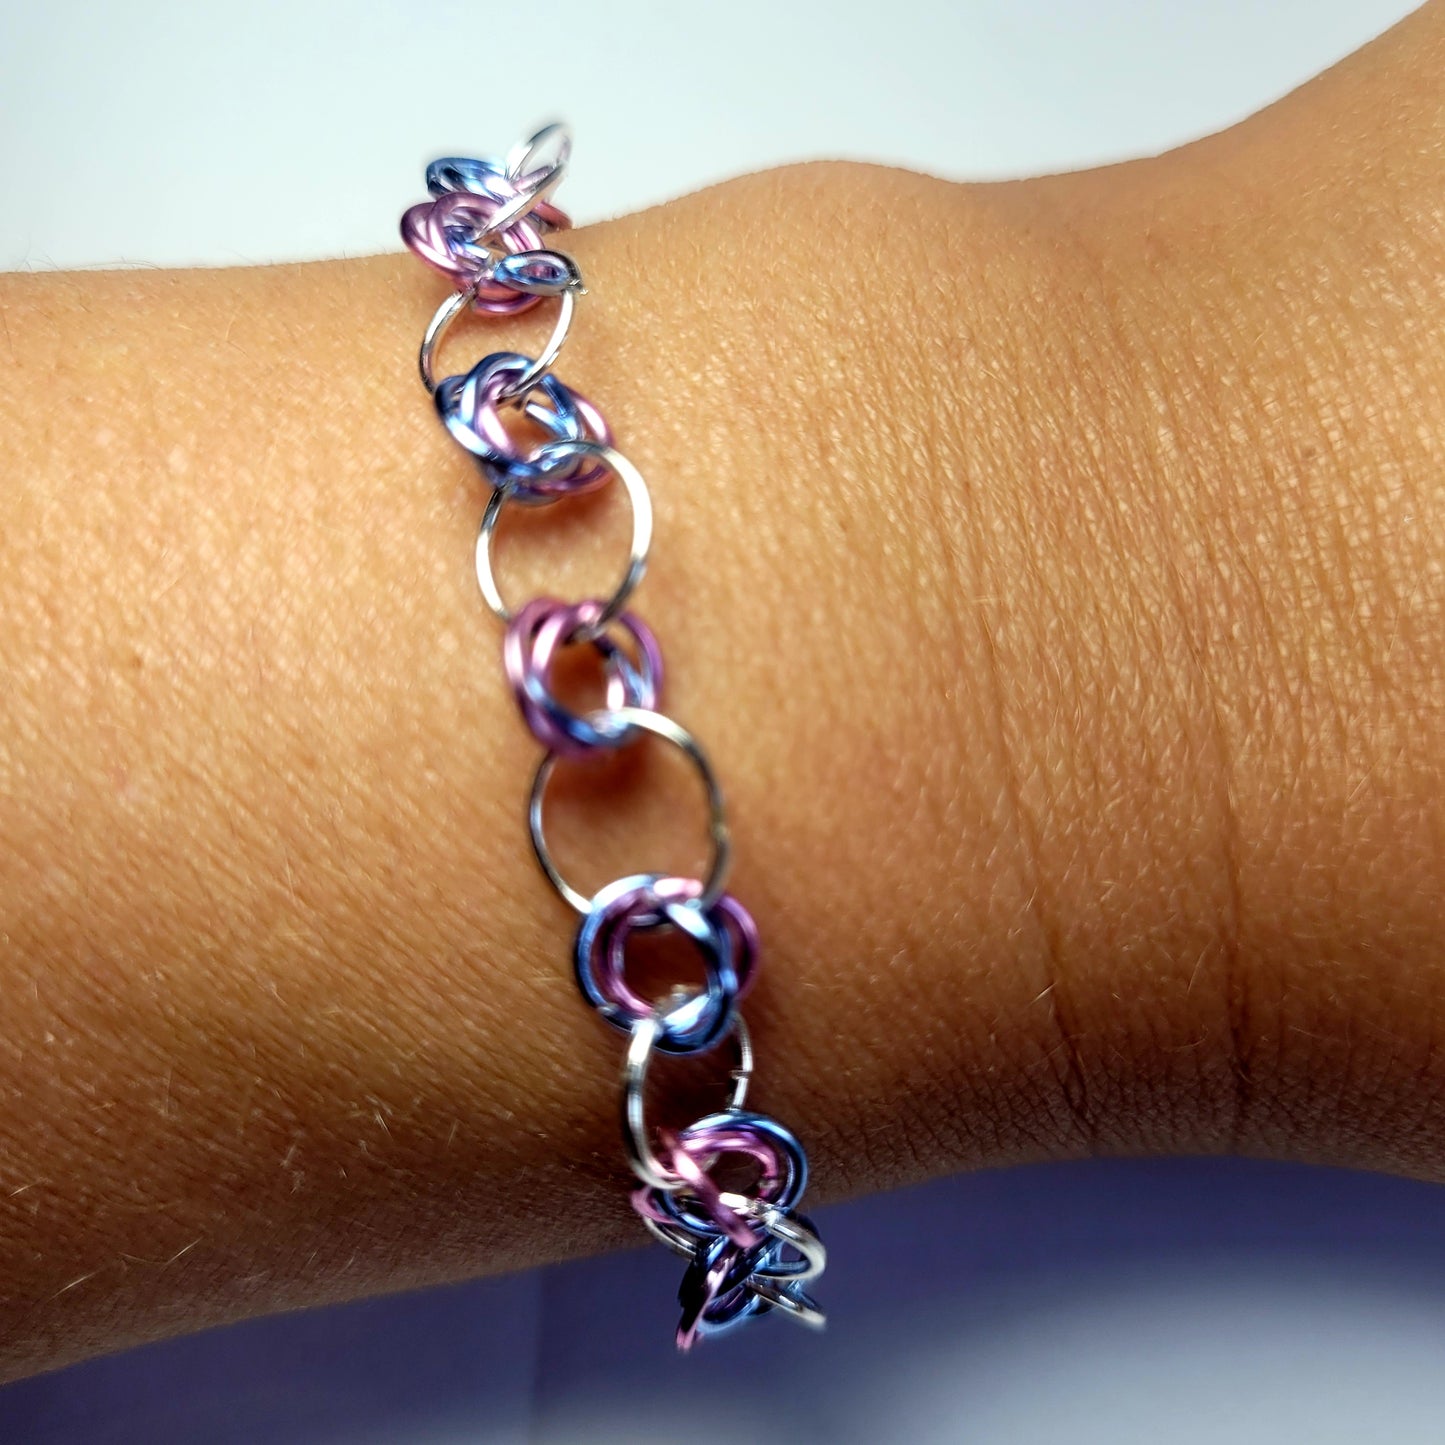 Bracelet and earring set, light pink, blue and silver chainmail